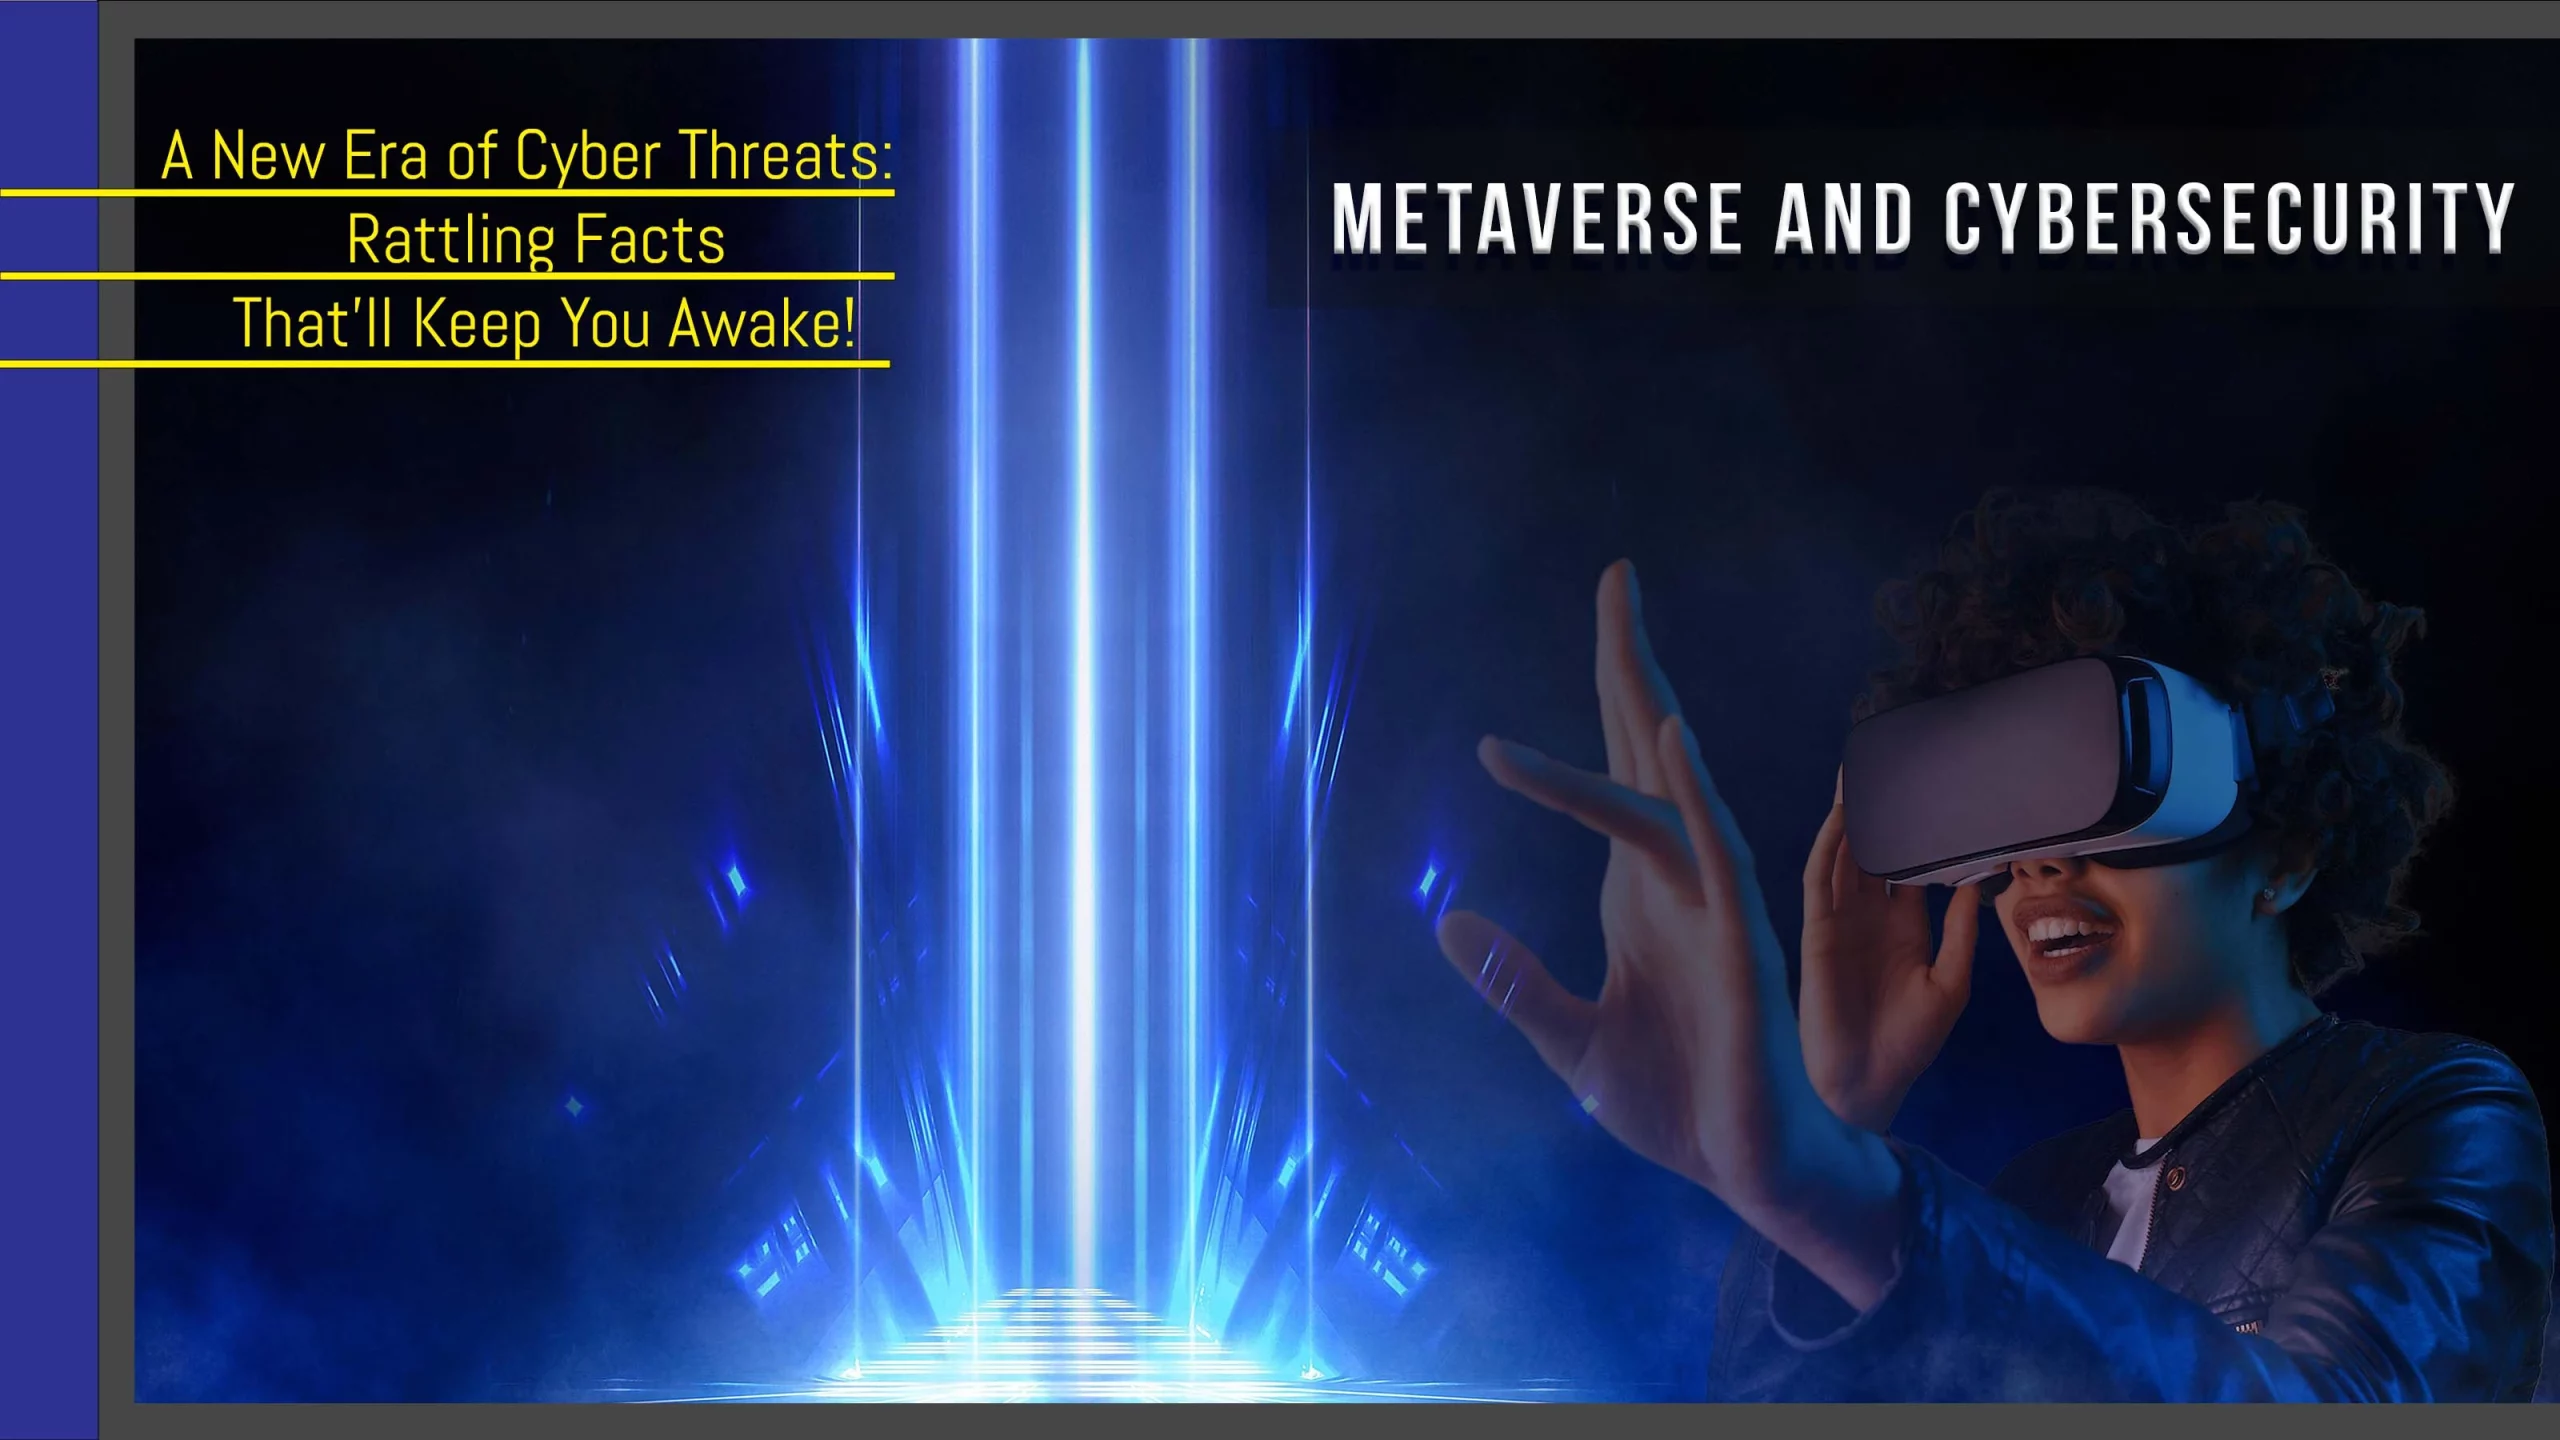 Metaverse and Cybersecurity: Rattling Facts That’ll Keep You Awake!